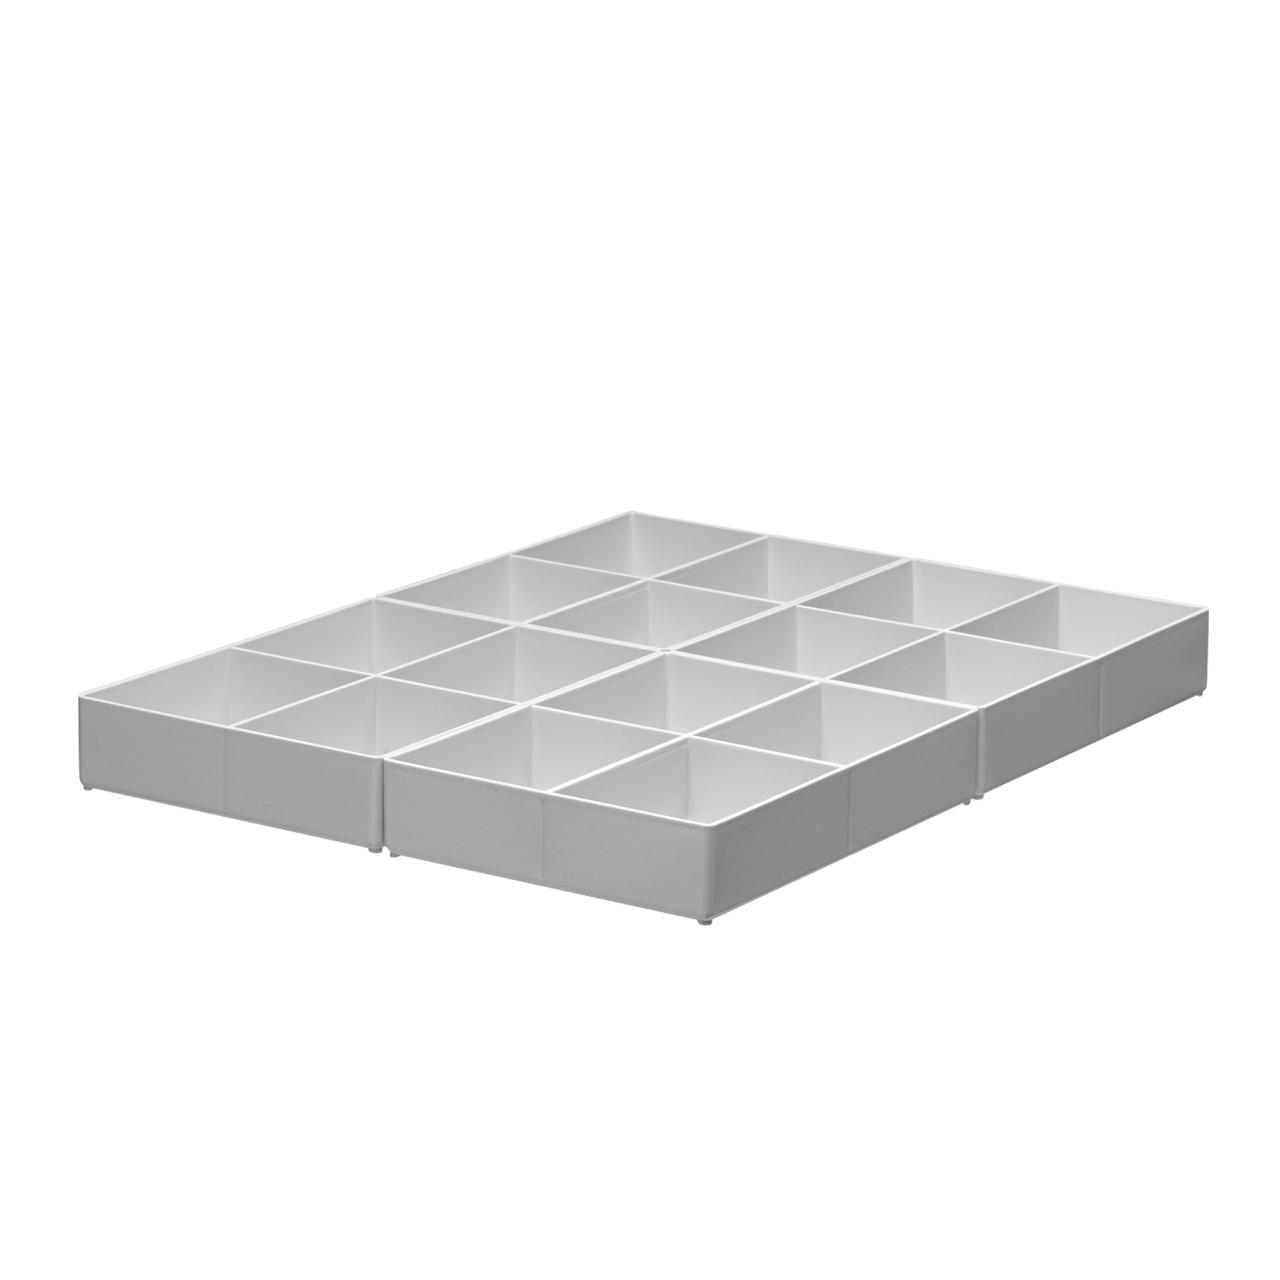 Insert Boxes, semi-high, 4 boxes per drawer, 4 compartments